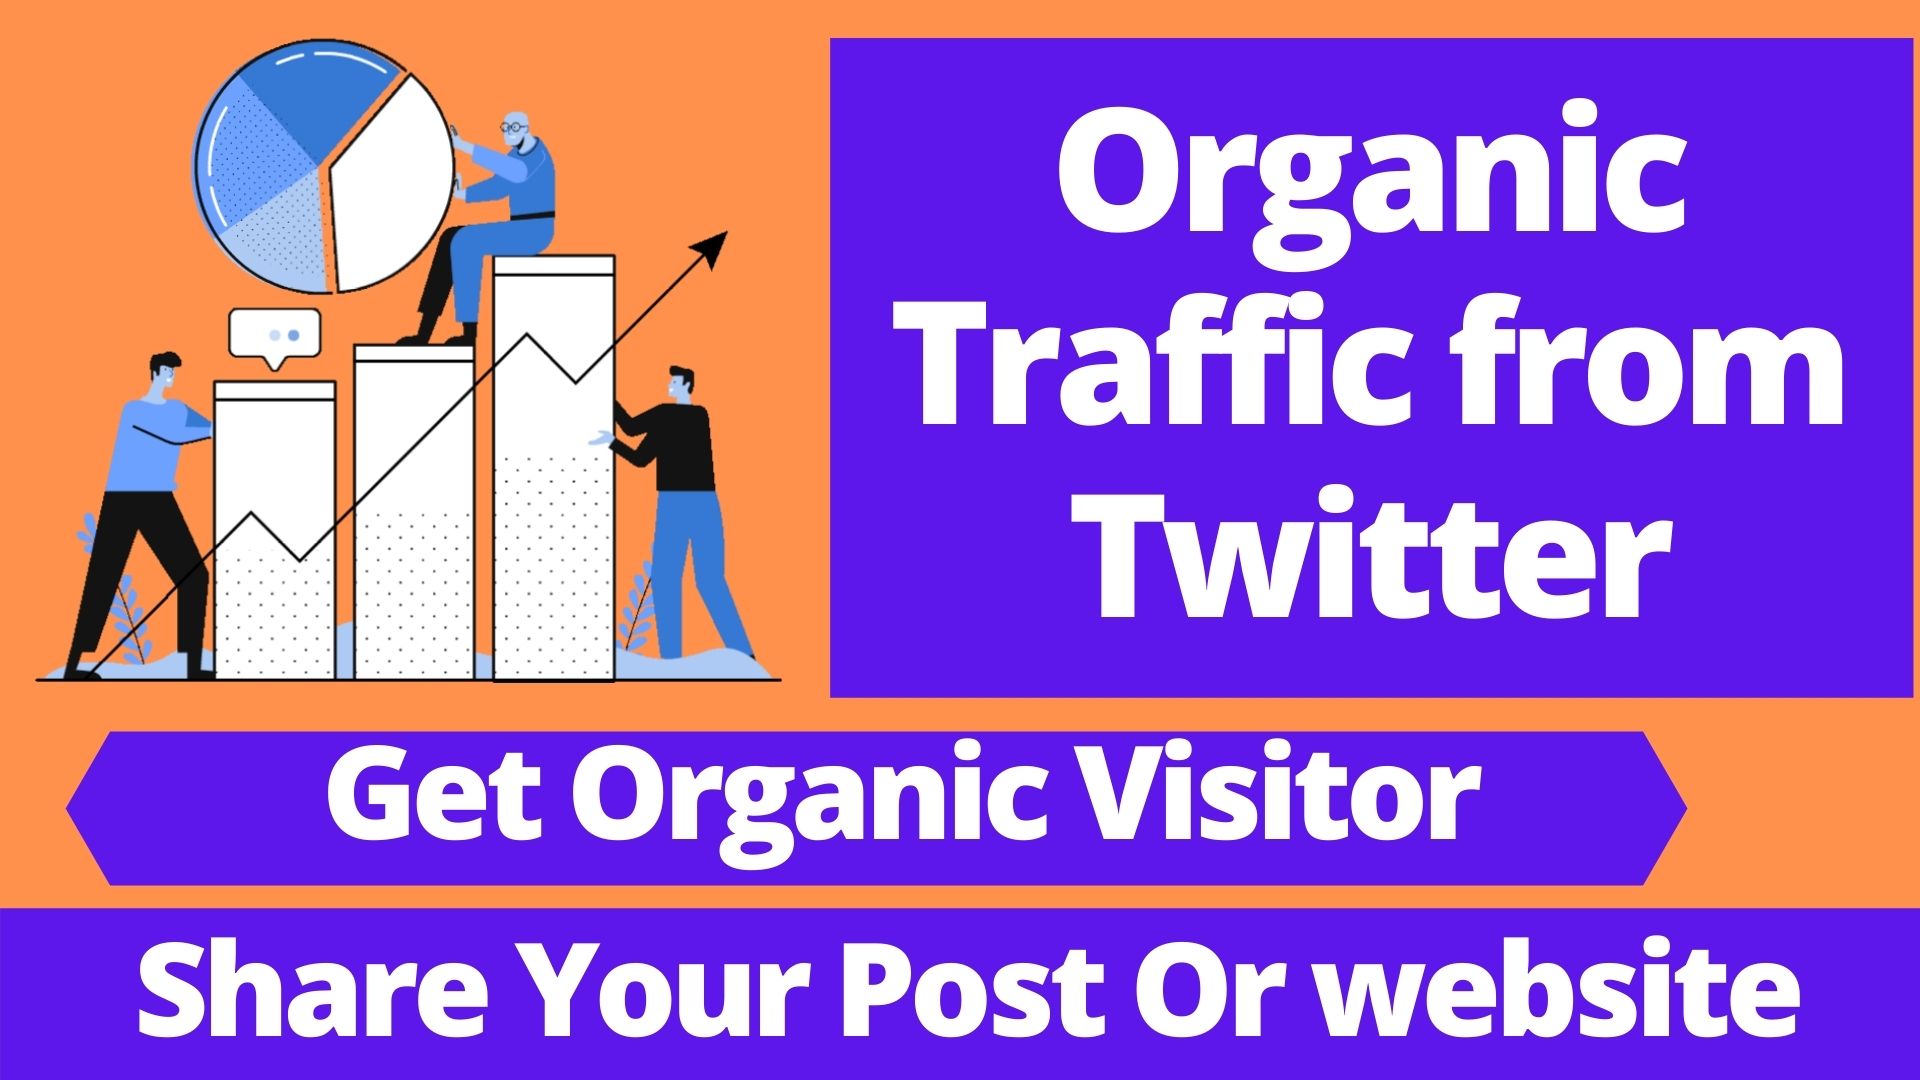 I will Share your Website/ Youtube Link on Twitter for Organic Traffic 